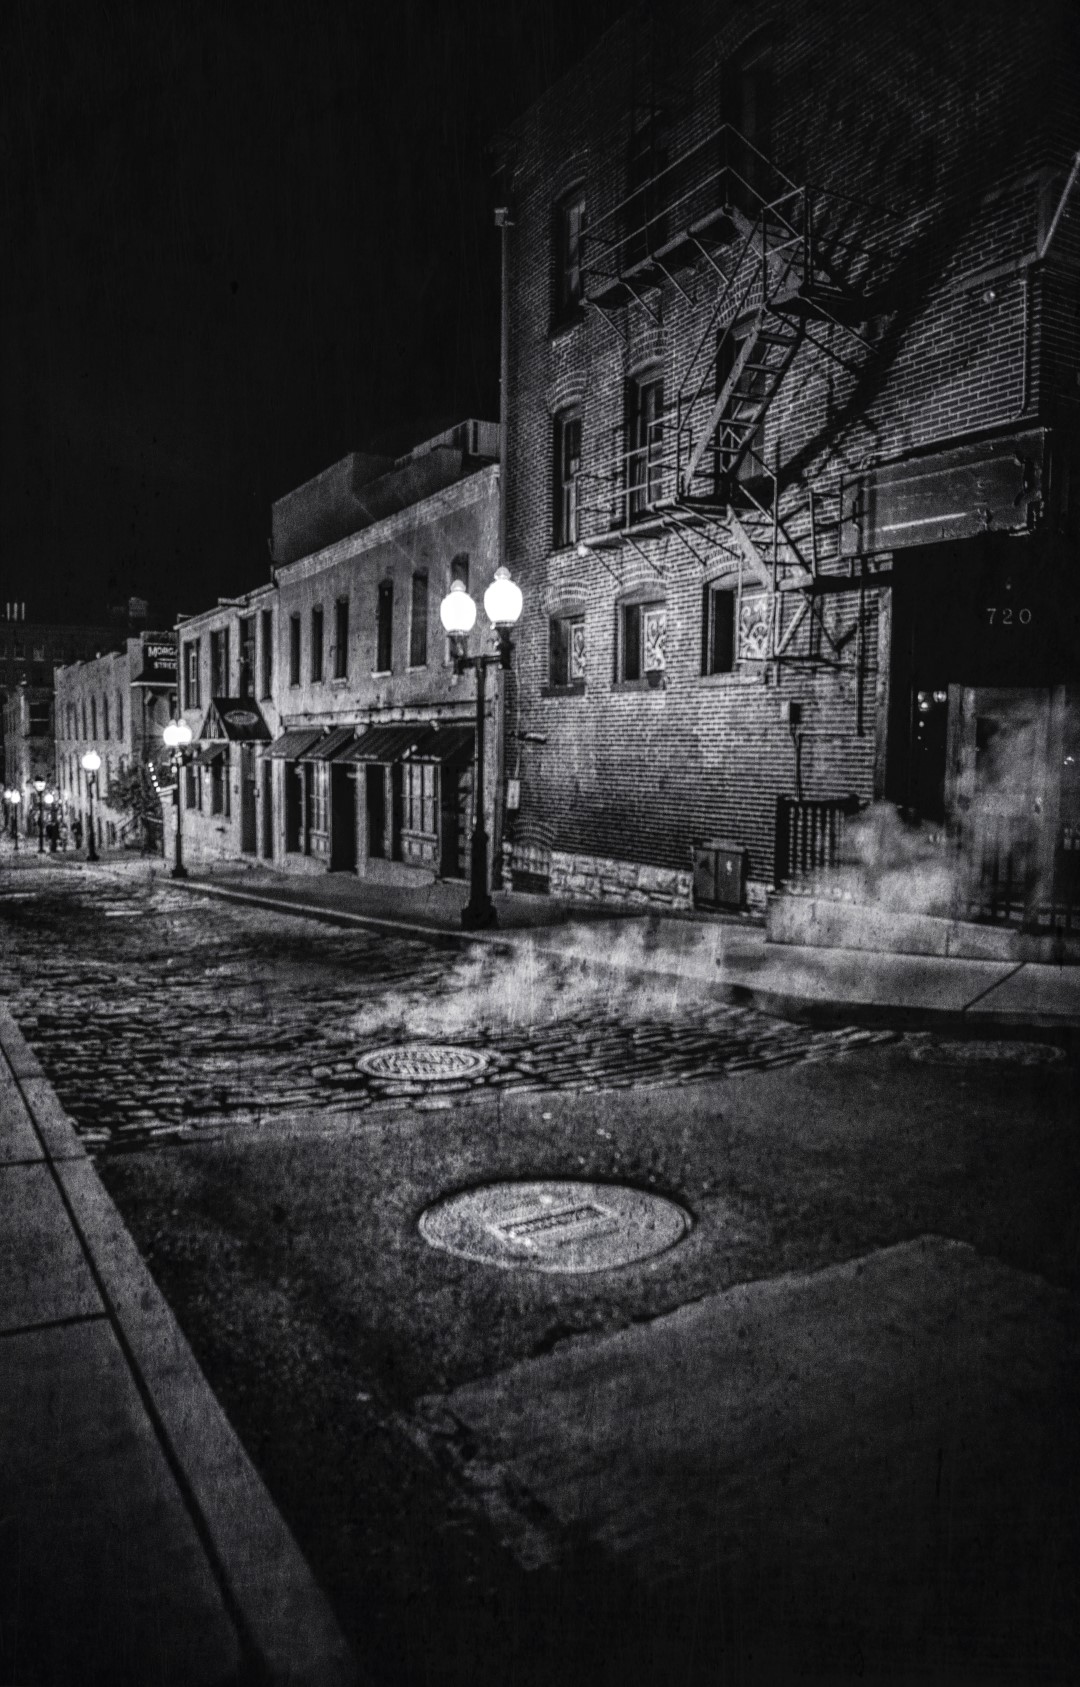 Steam escapes from a manhole along a street in Laclede's Landing at night.